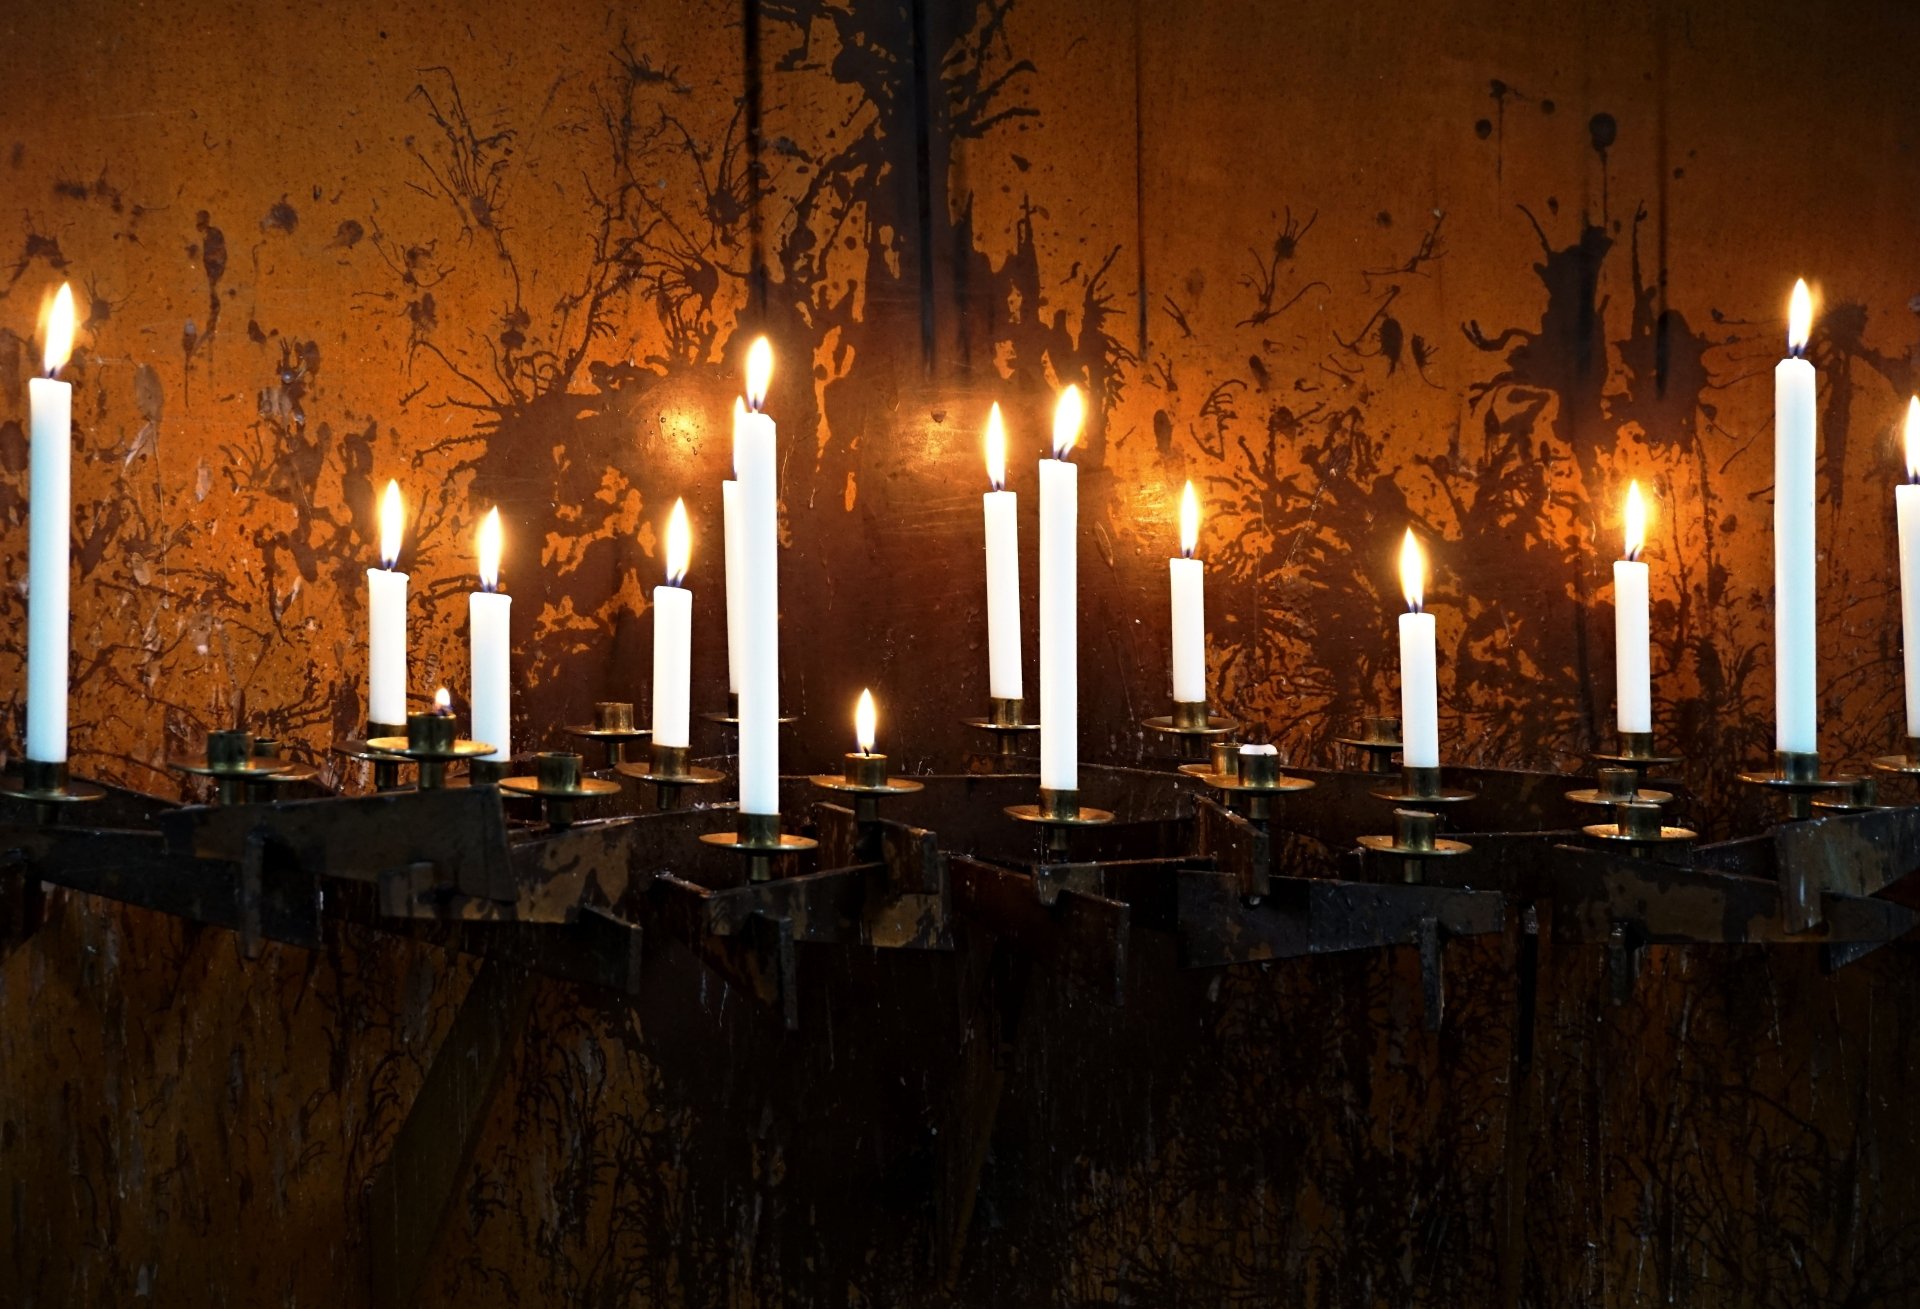 Candles In A Dark And Creepy Room By Blitzmaerker